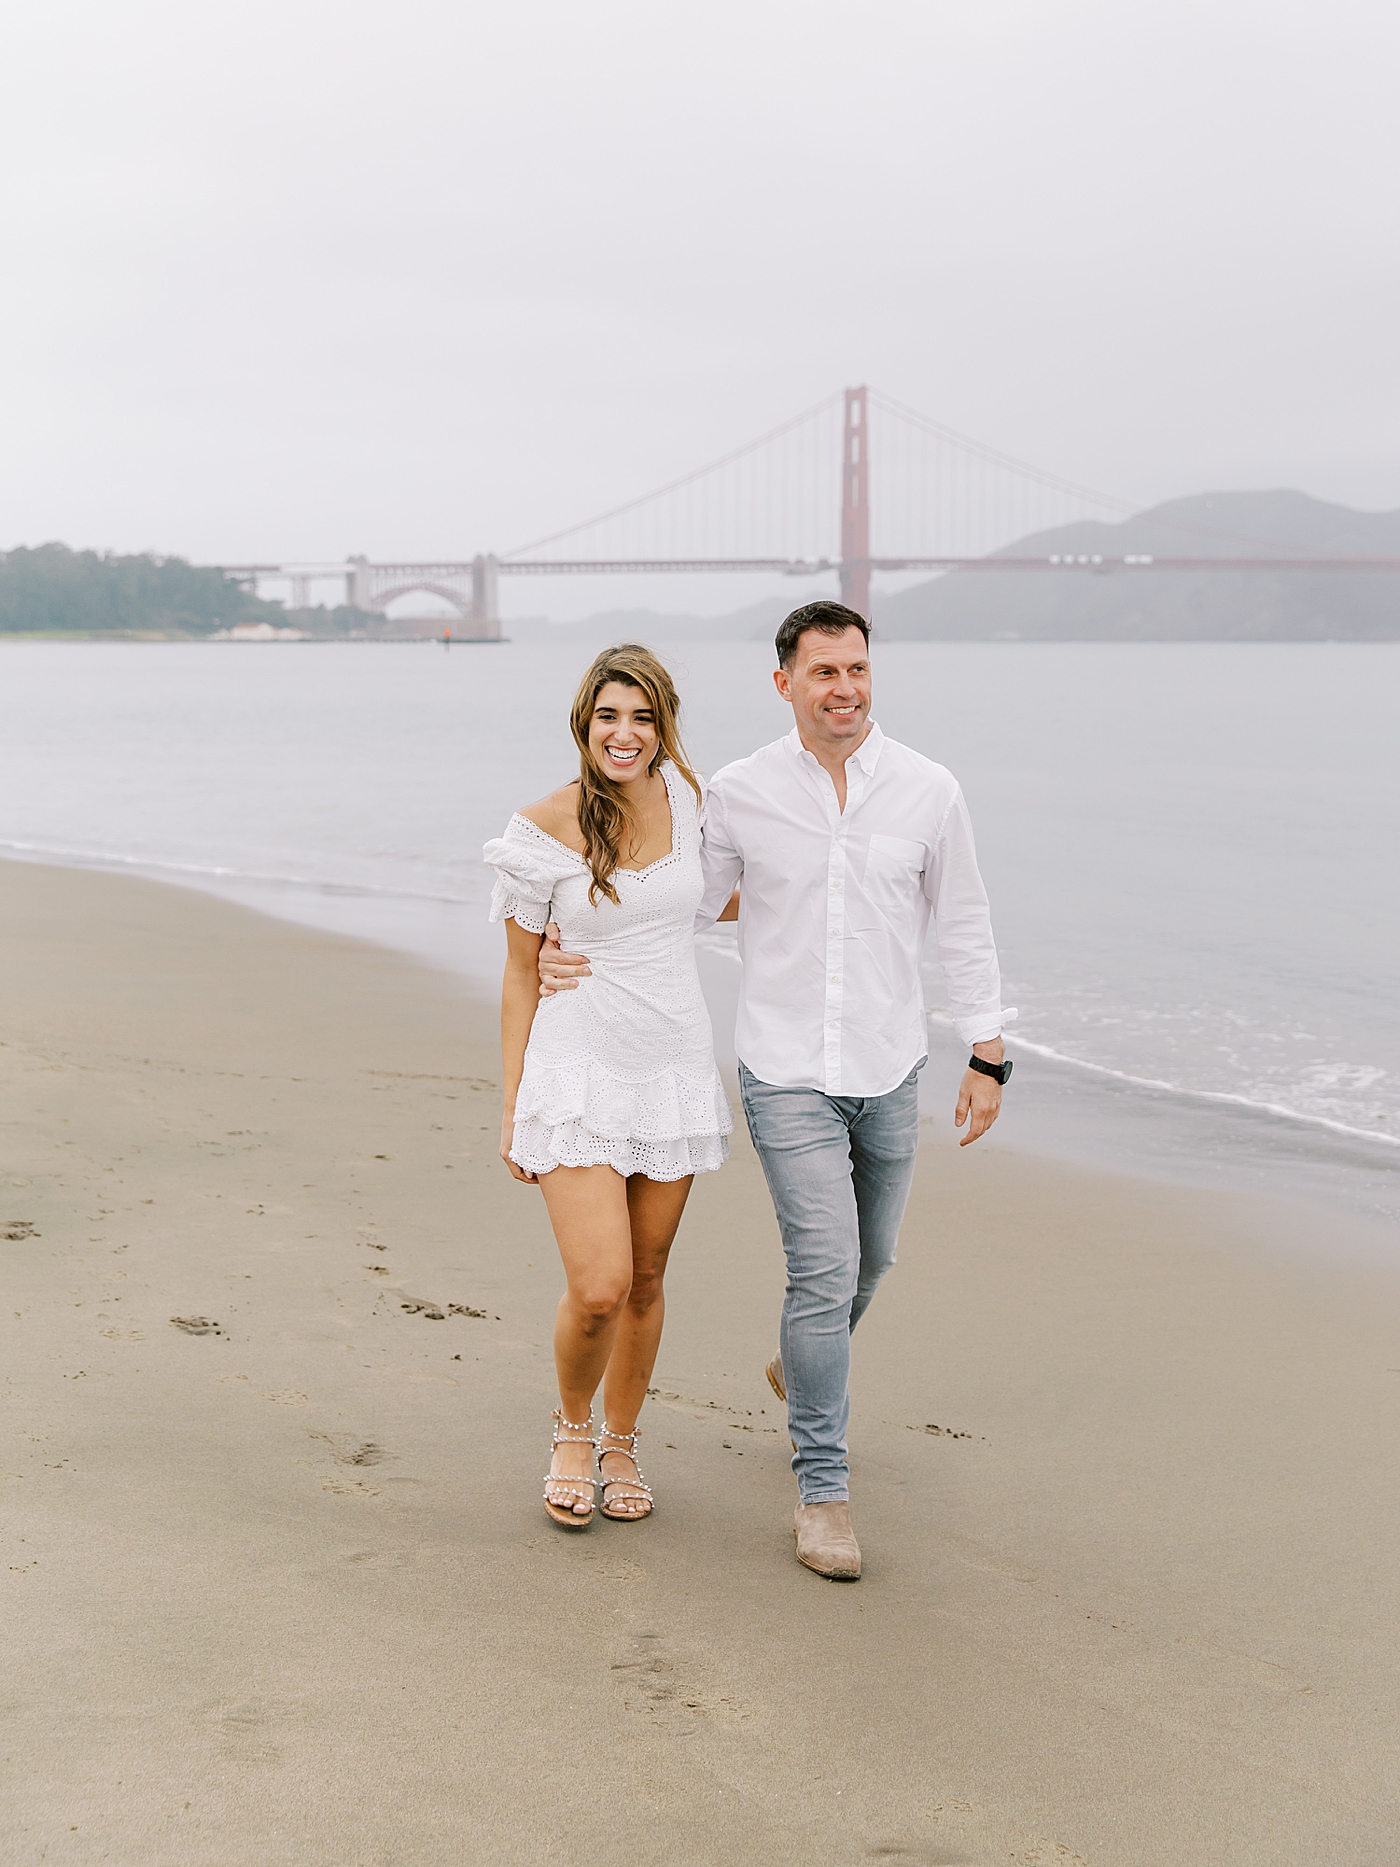 Couple laughing on the beach during their San Francisco engagement session | Photo by Diane Sotero